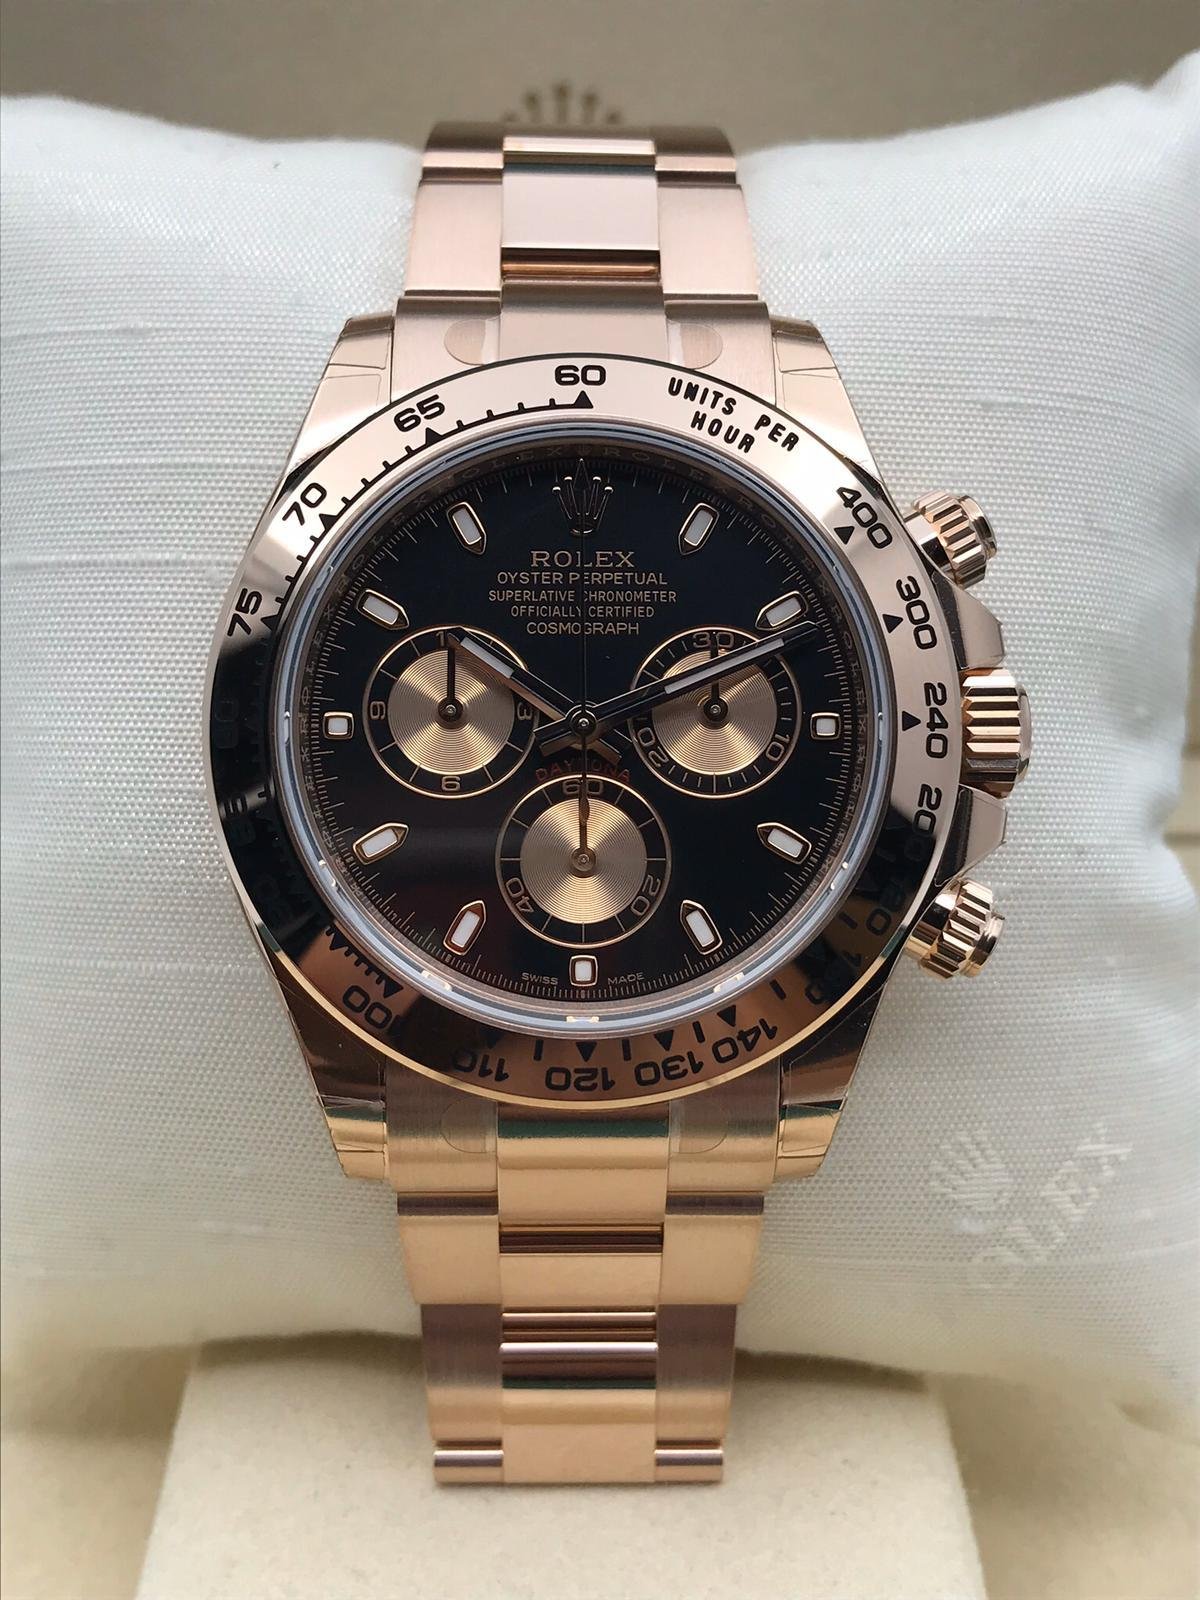 Rolex [New] Daytona Rose Gold 116505 Black Dial Watch In Hong Kong For ...